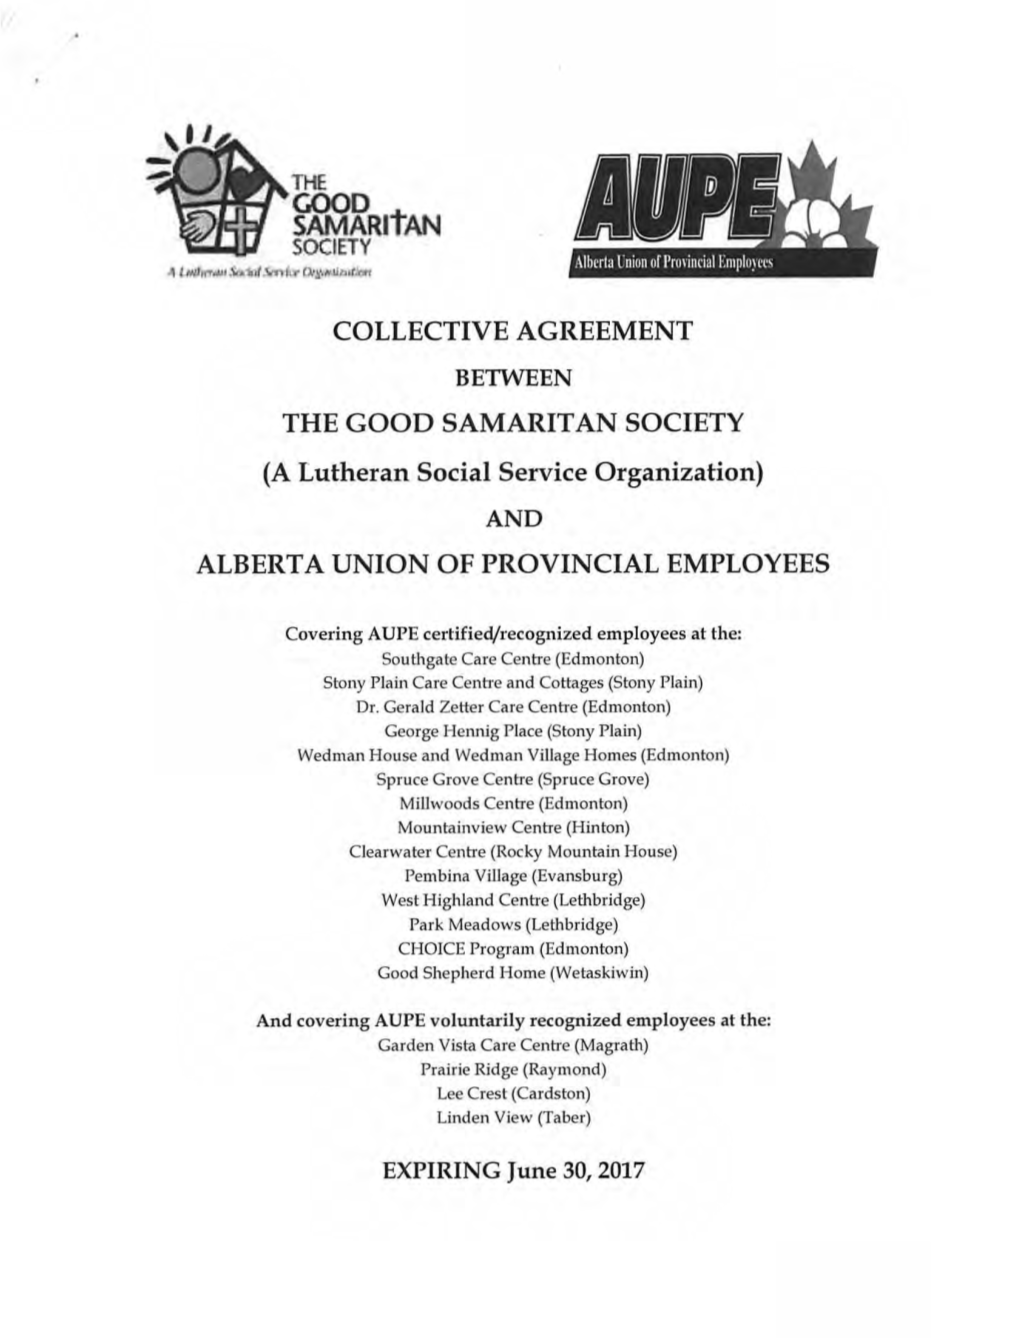 Download the LOCAL 042 Collective Agreement